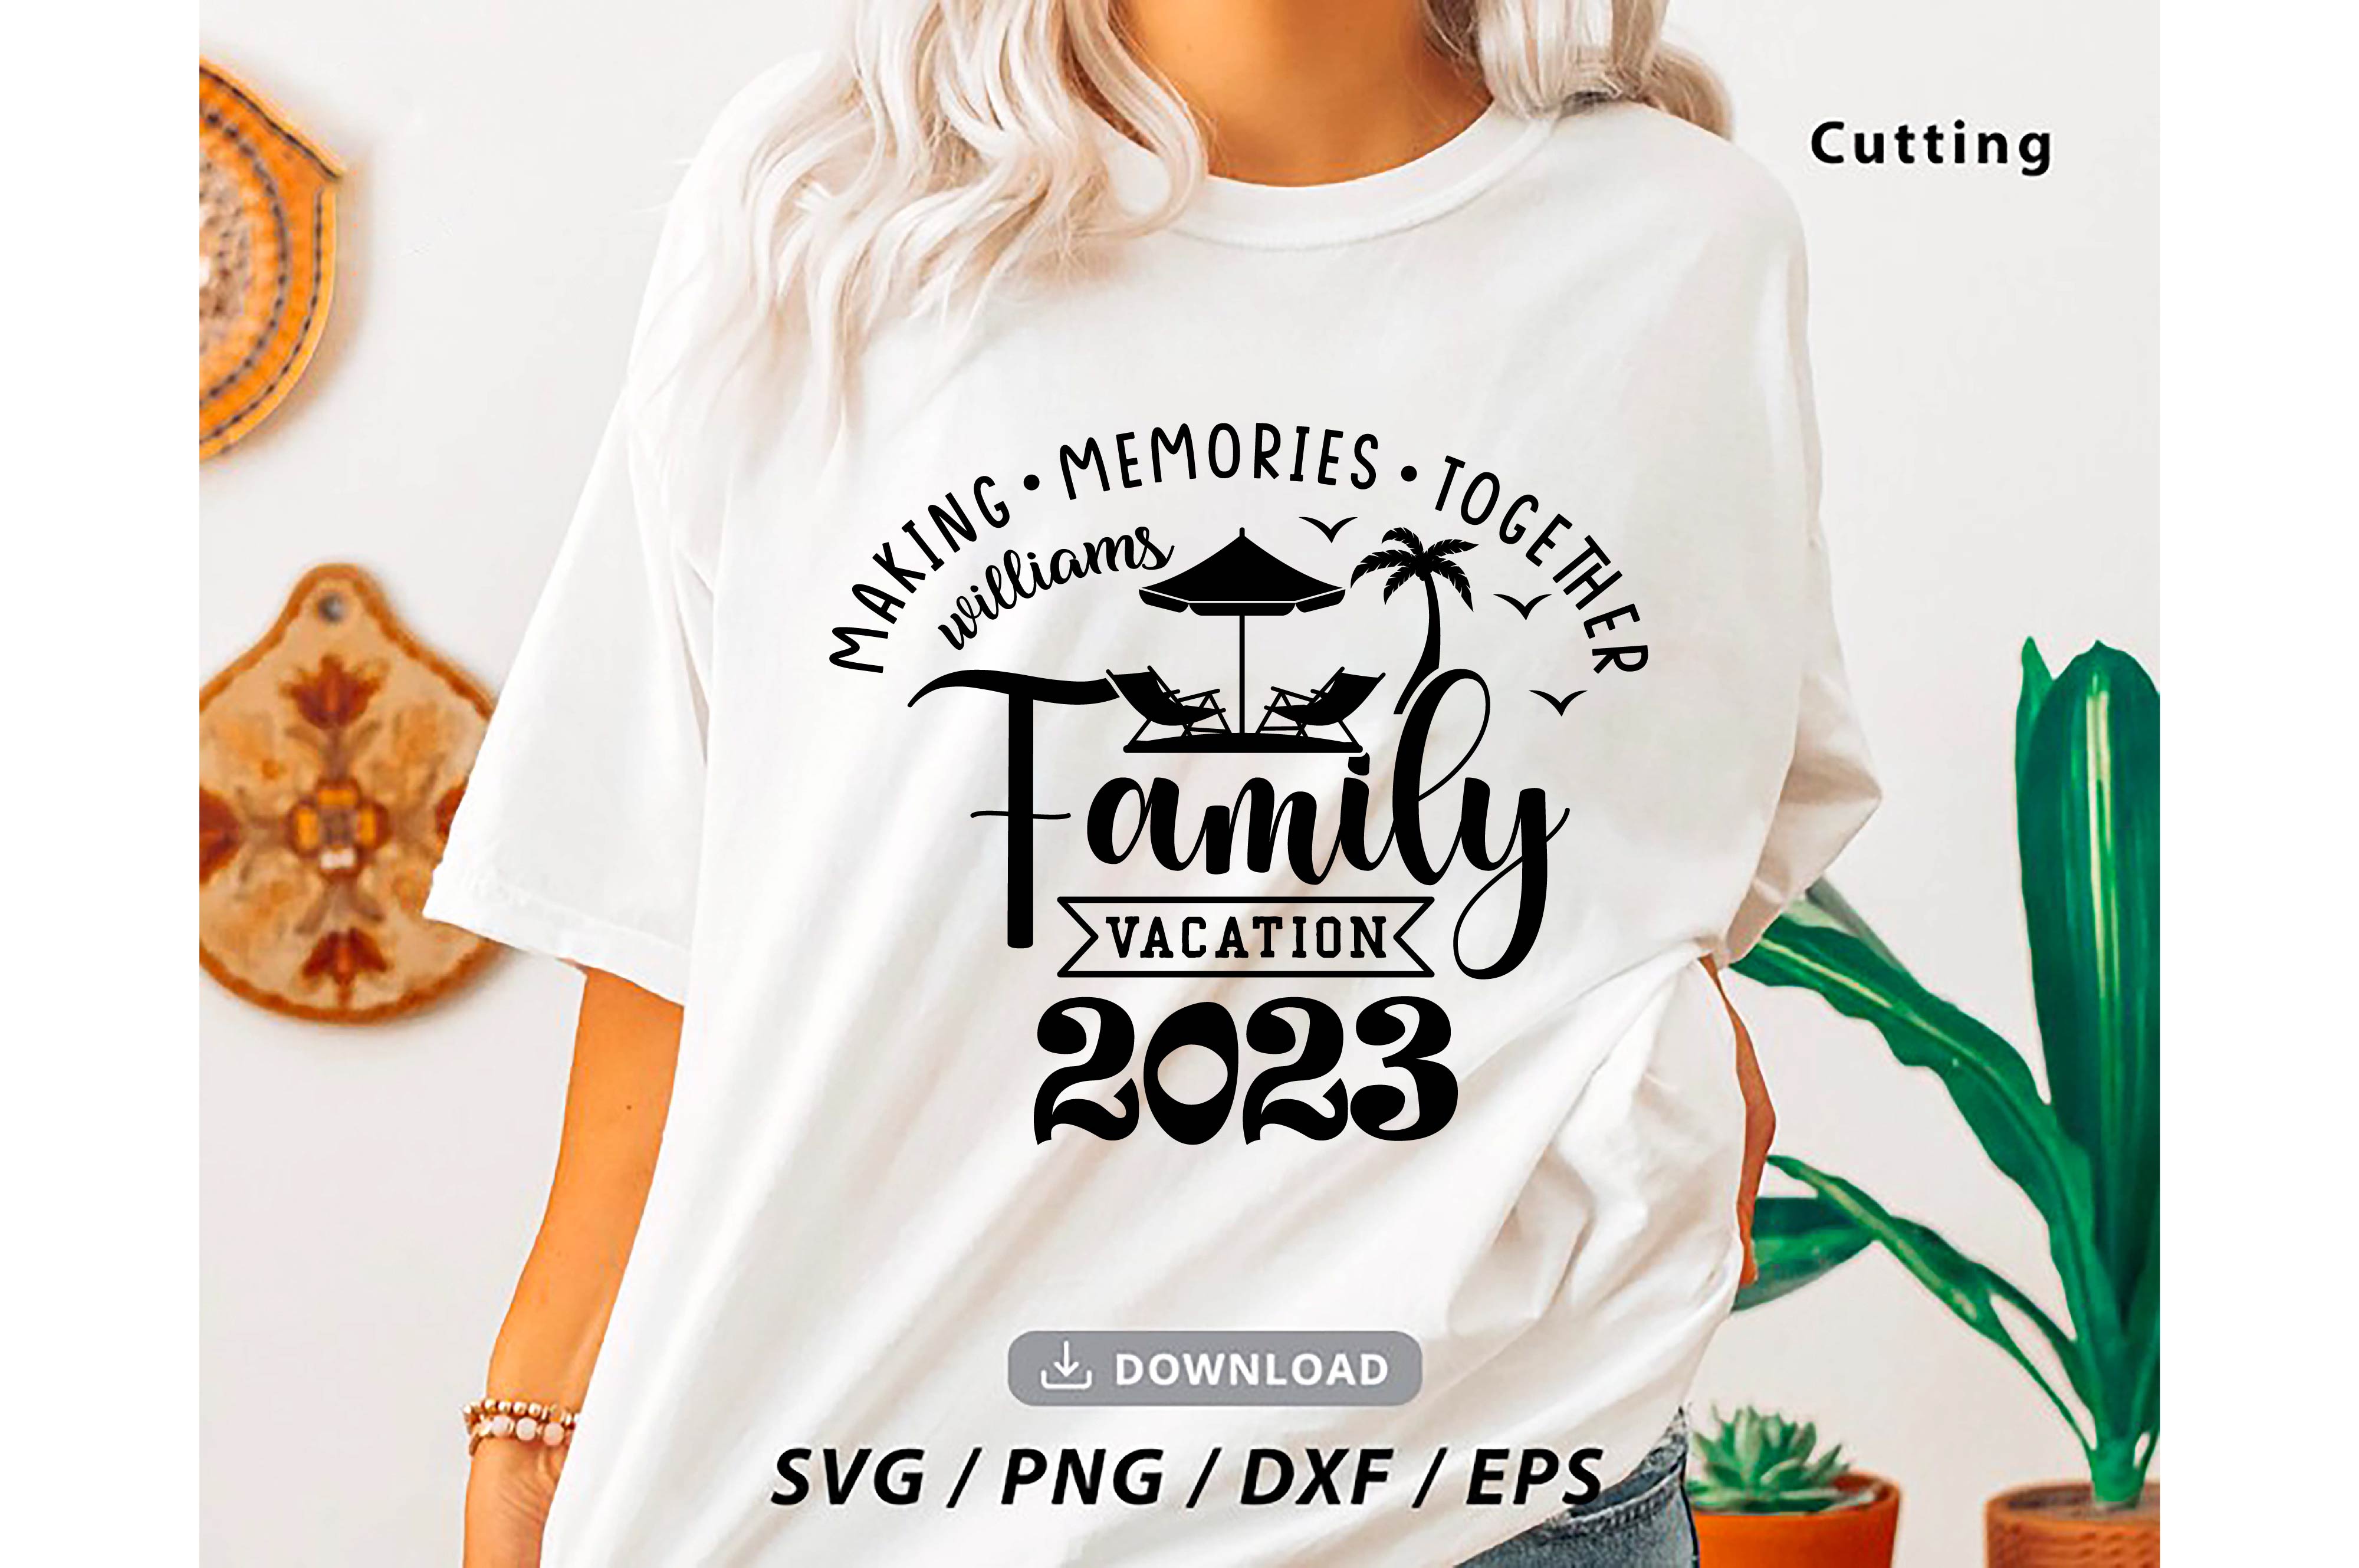 family vacation 2023 svg making memories together custom family vacation cut files summer 2023 vacations 17 835